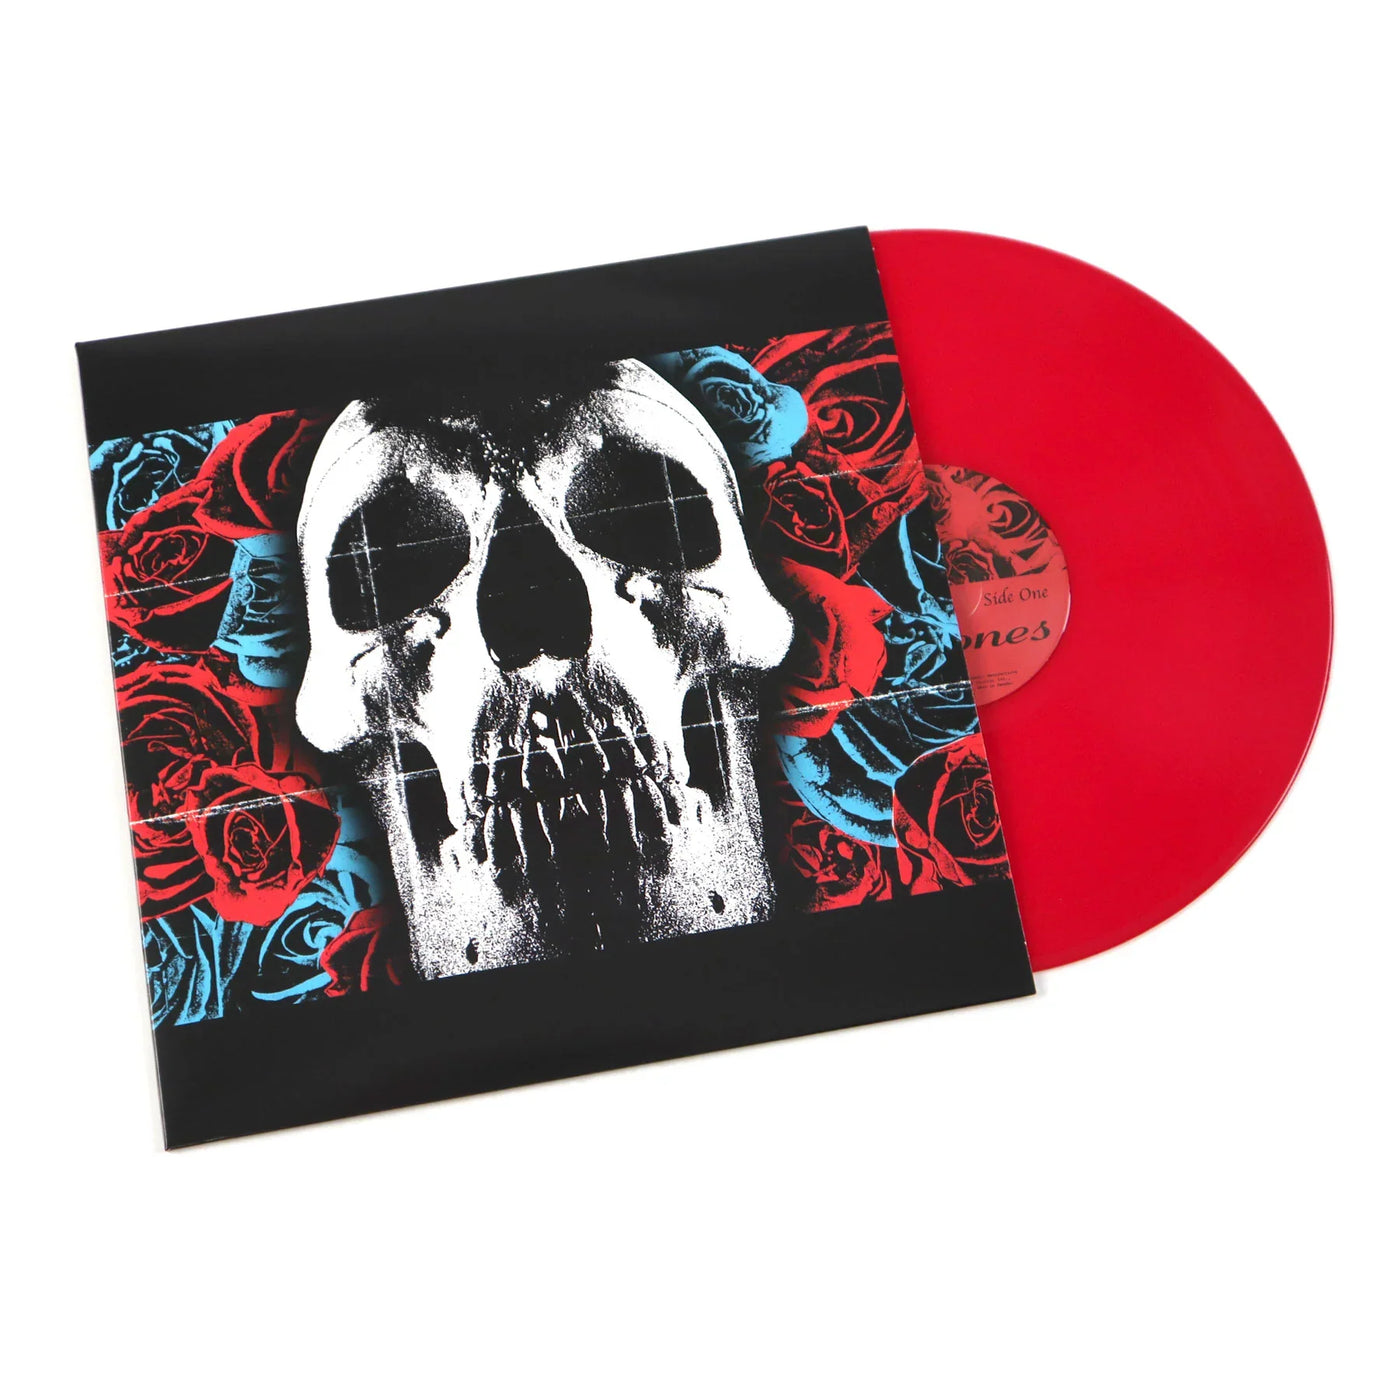 NEW/SEALED! Deftones - Deftones (Limited Edition, Colored Vinyl, Red, Anniversary Edition)